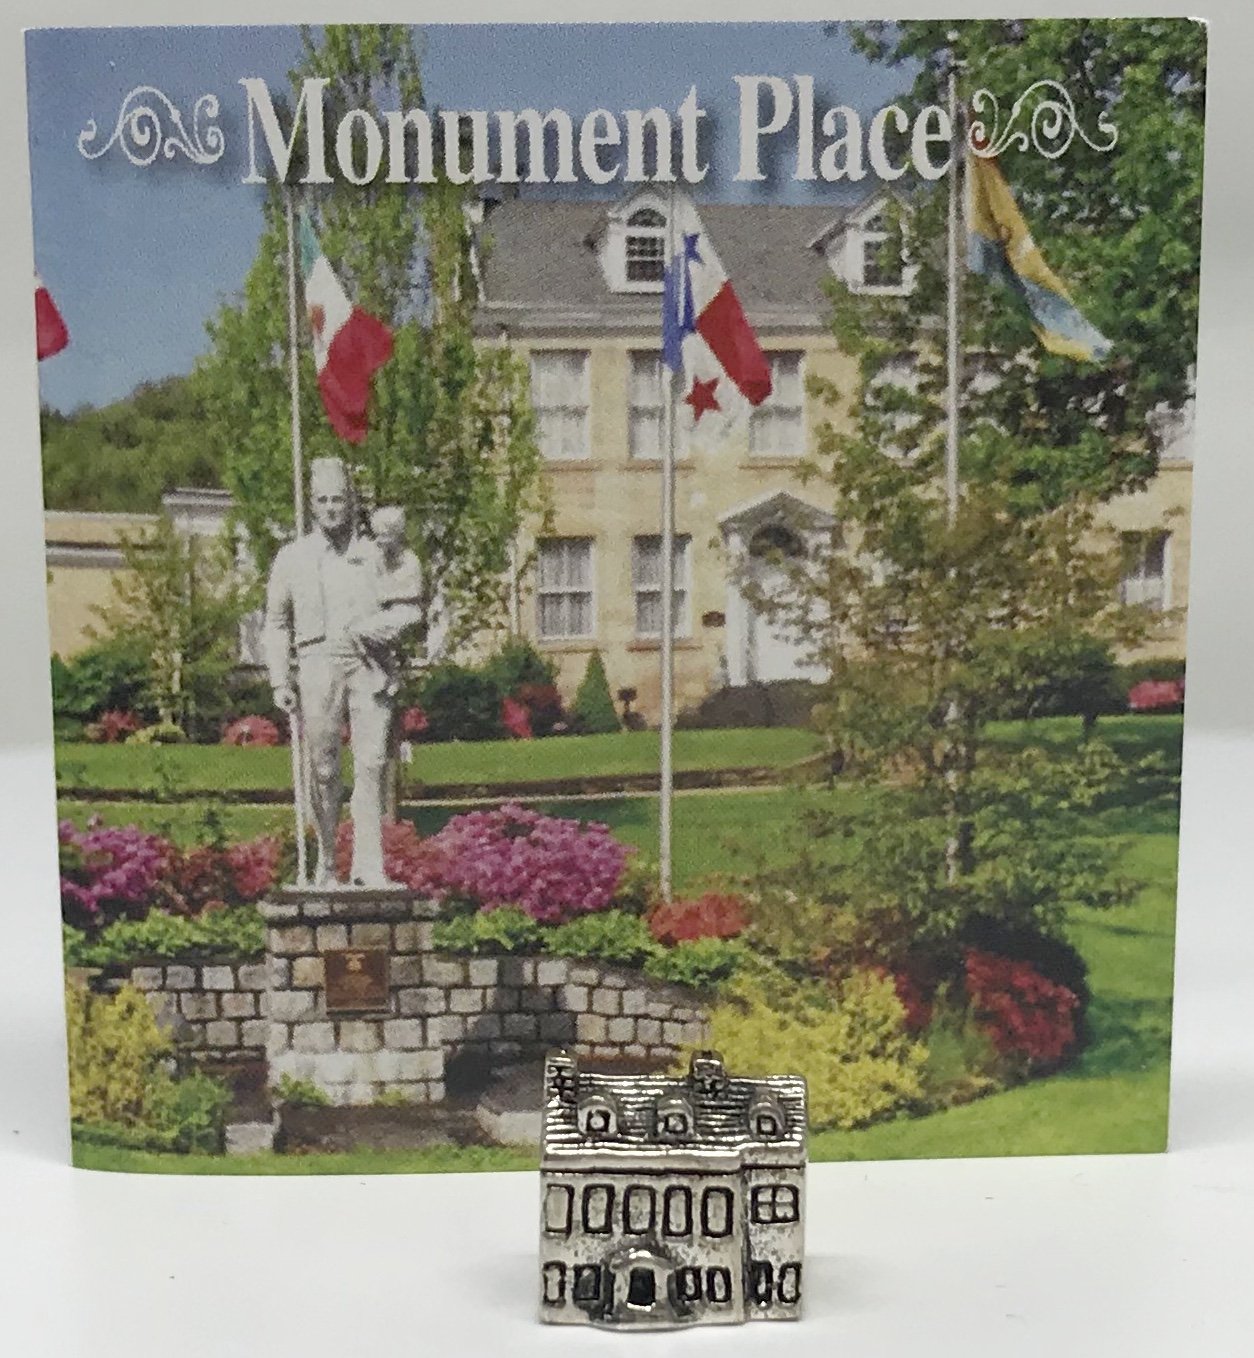 The Monument Place Bead-Howard's Exclusive-Howard's Diamond Center